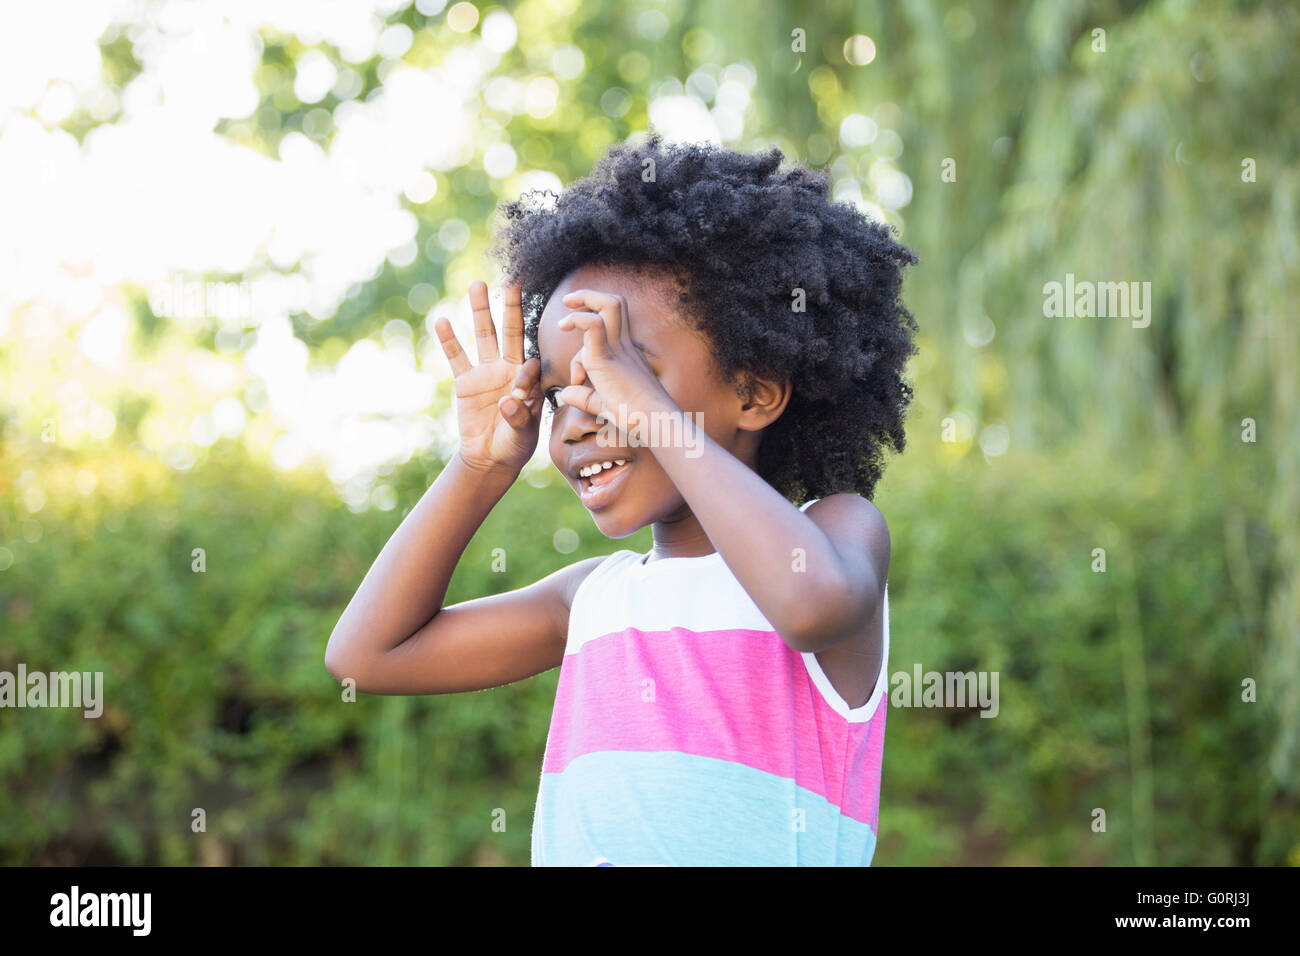 A kid putting her hands like glasses Stock Photo